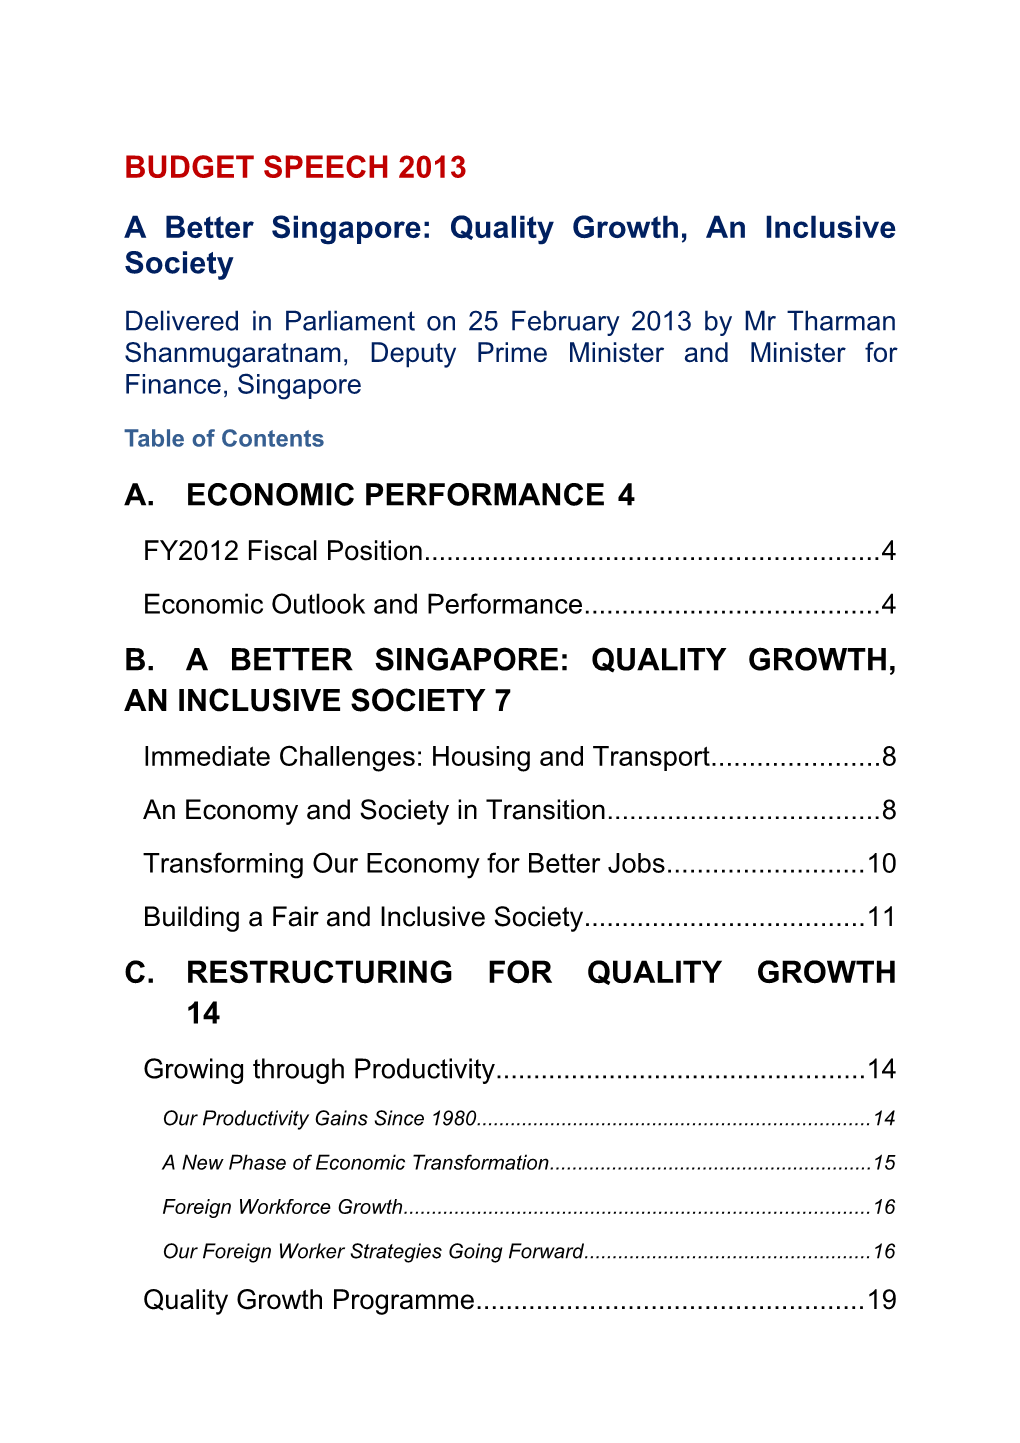 A Better Singapore: Quality Growth, an Inclusive Society